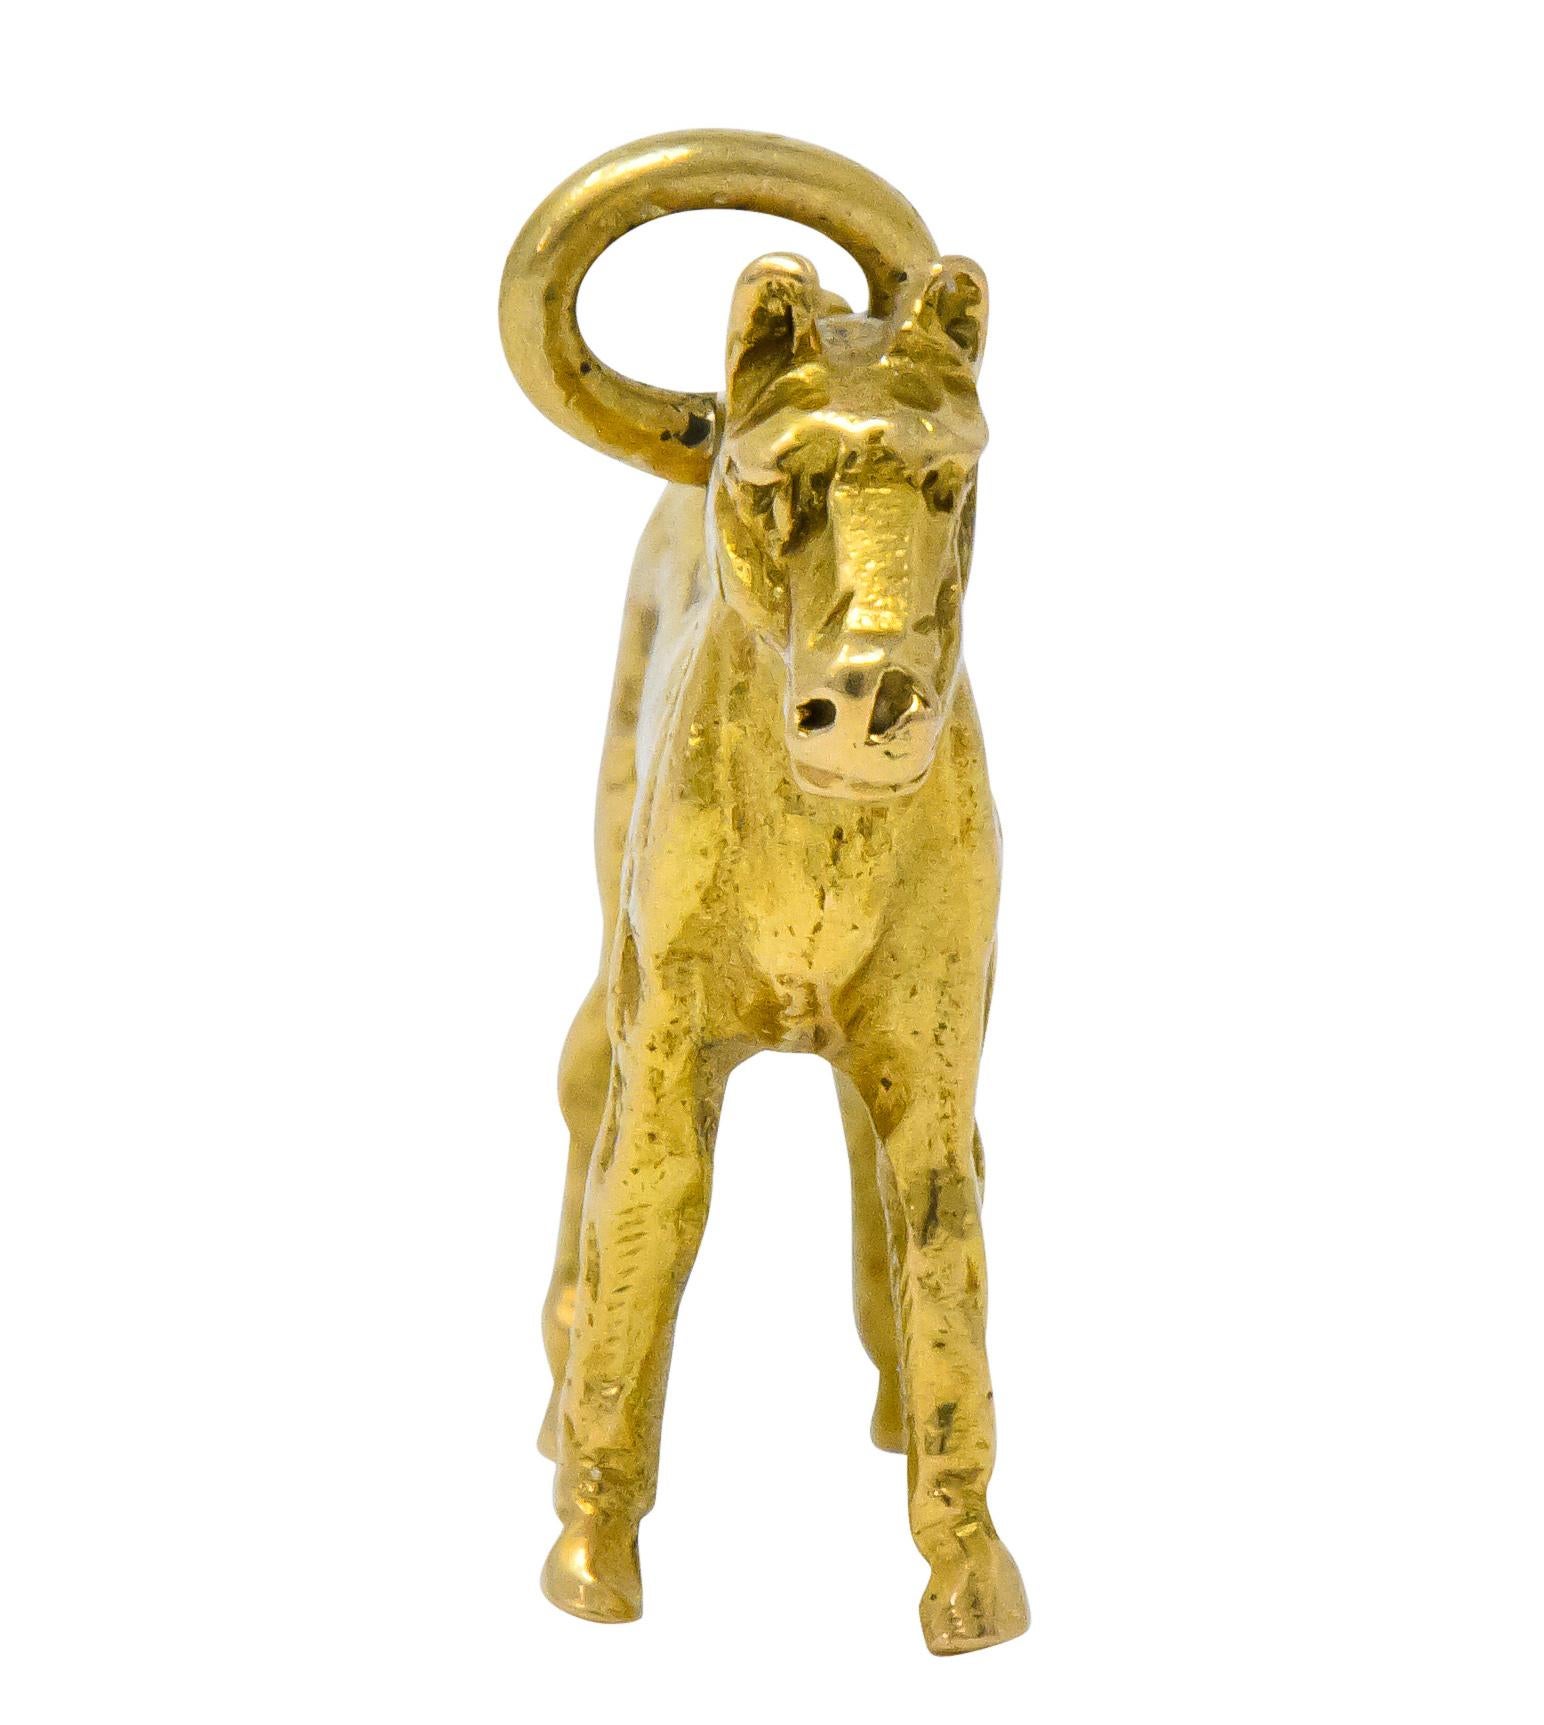 Horse charm stoically standing and looking forward

Textured detailing of face, mane, and hooves

Stamped 14 for 14 karat gold

Measures: approx. 7/8 x 3/4 (including bale) inch

Circa 1910

Total weight: 3.2 grams

Proud. Natural. Equine.


